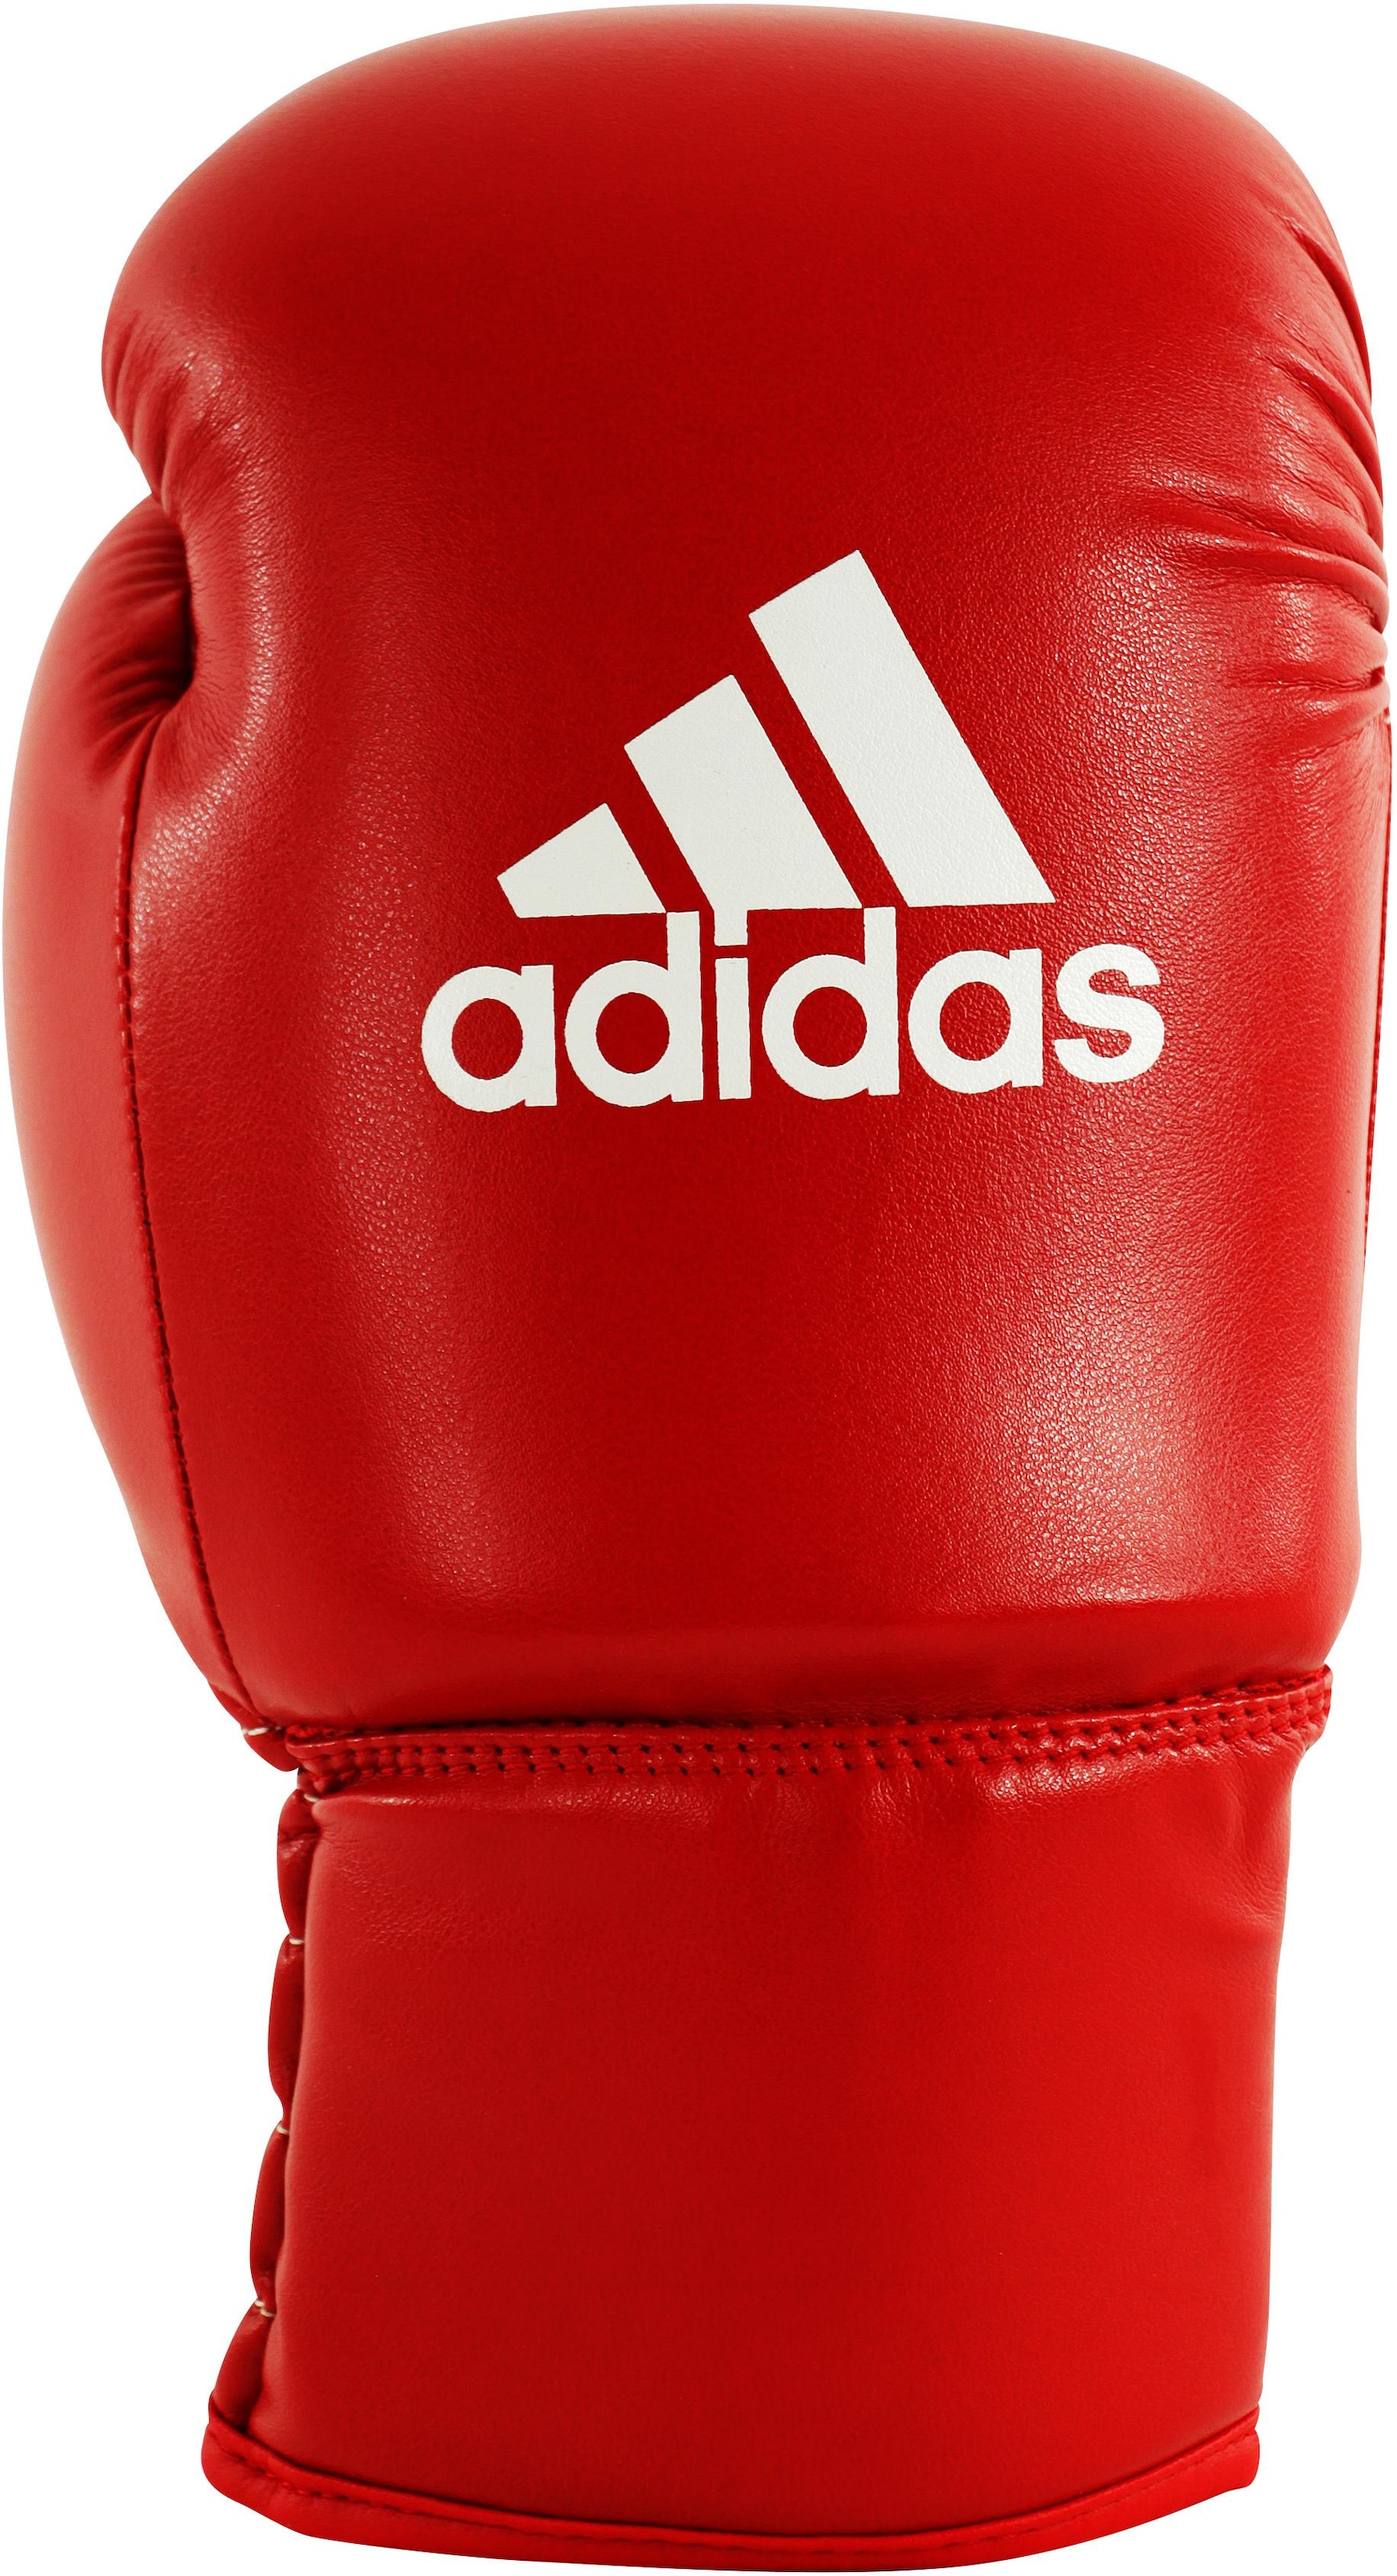 adidas Performance Boxhandschuhe »ROOKIE« online bei OTTO